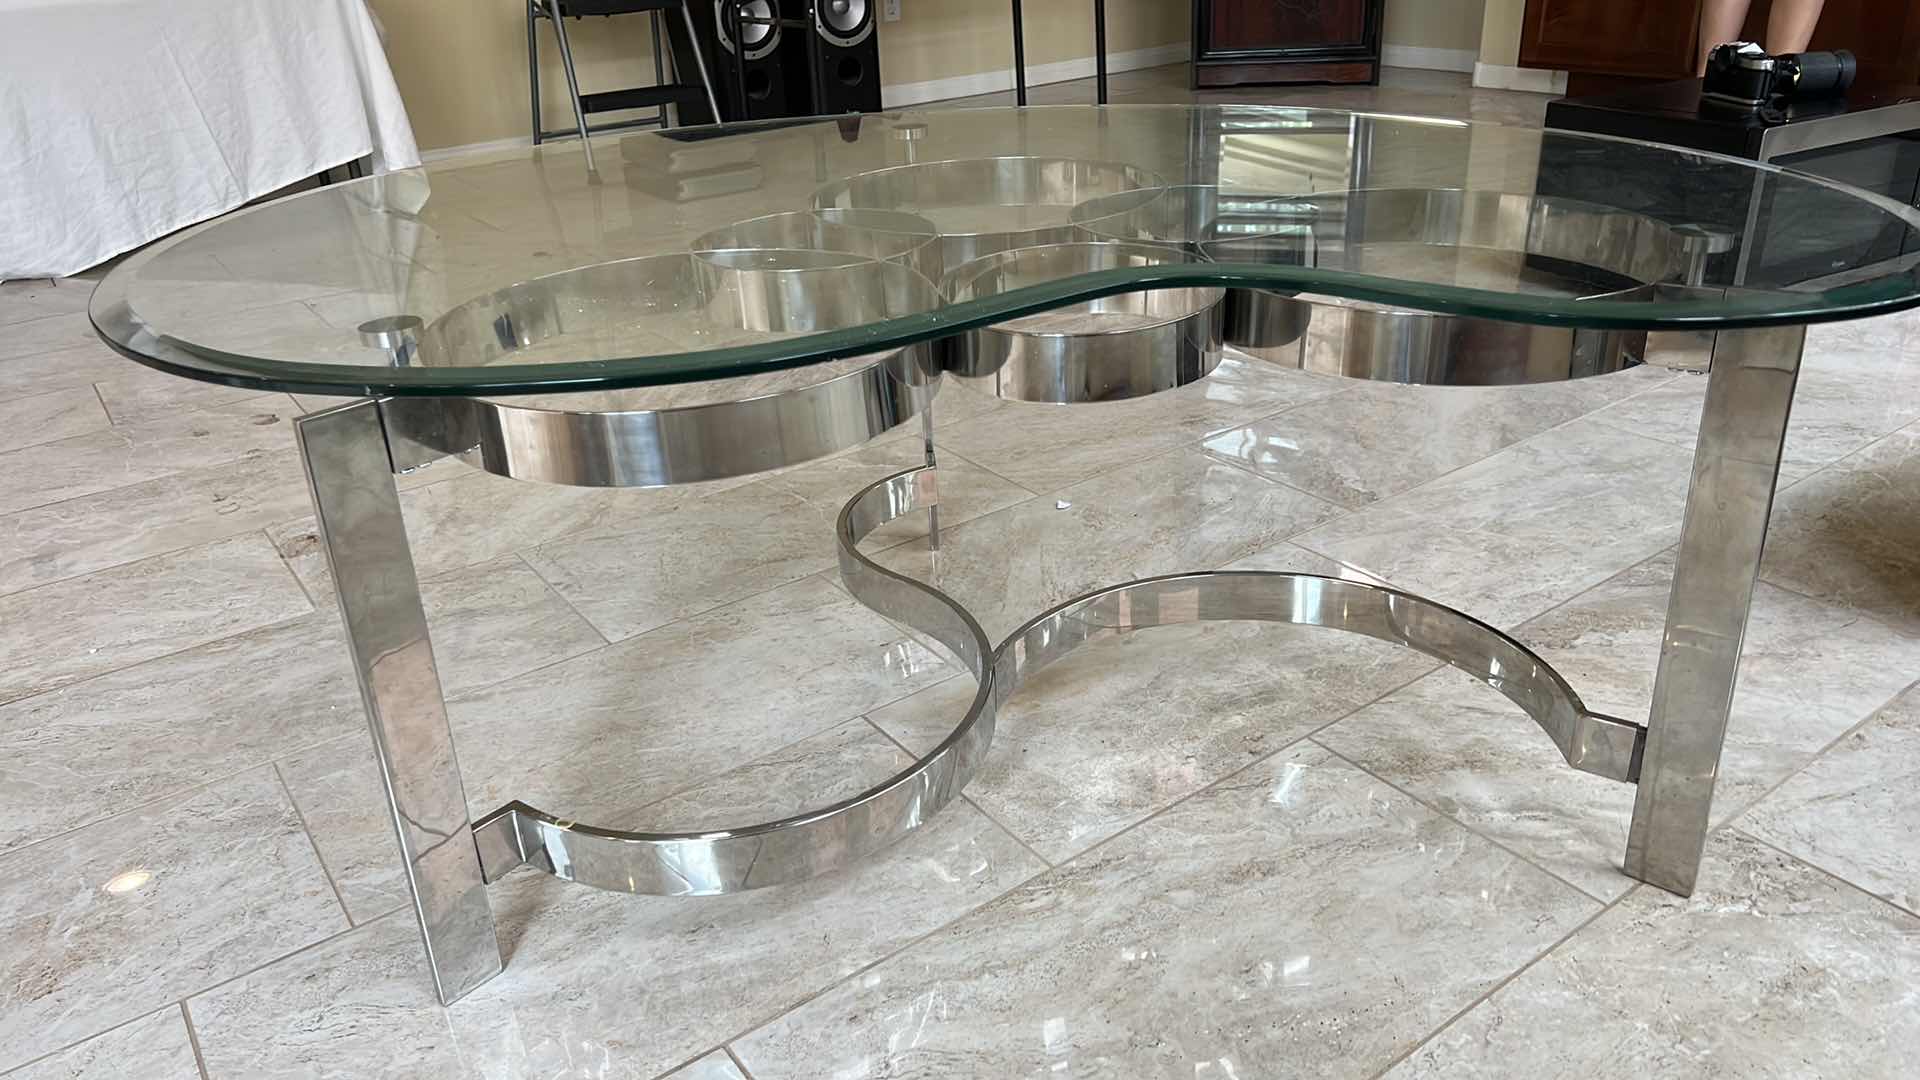 Photo 3 of MODERN SCULPTURED STEEL GLASS AND CHROME COFFEE TABLE 52” x 36” H20”